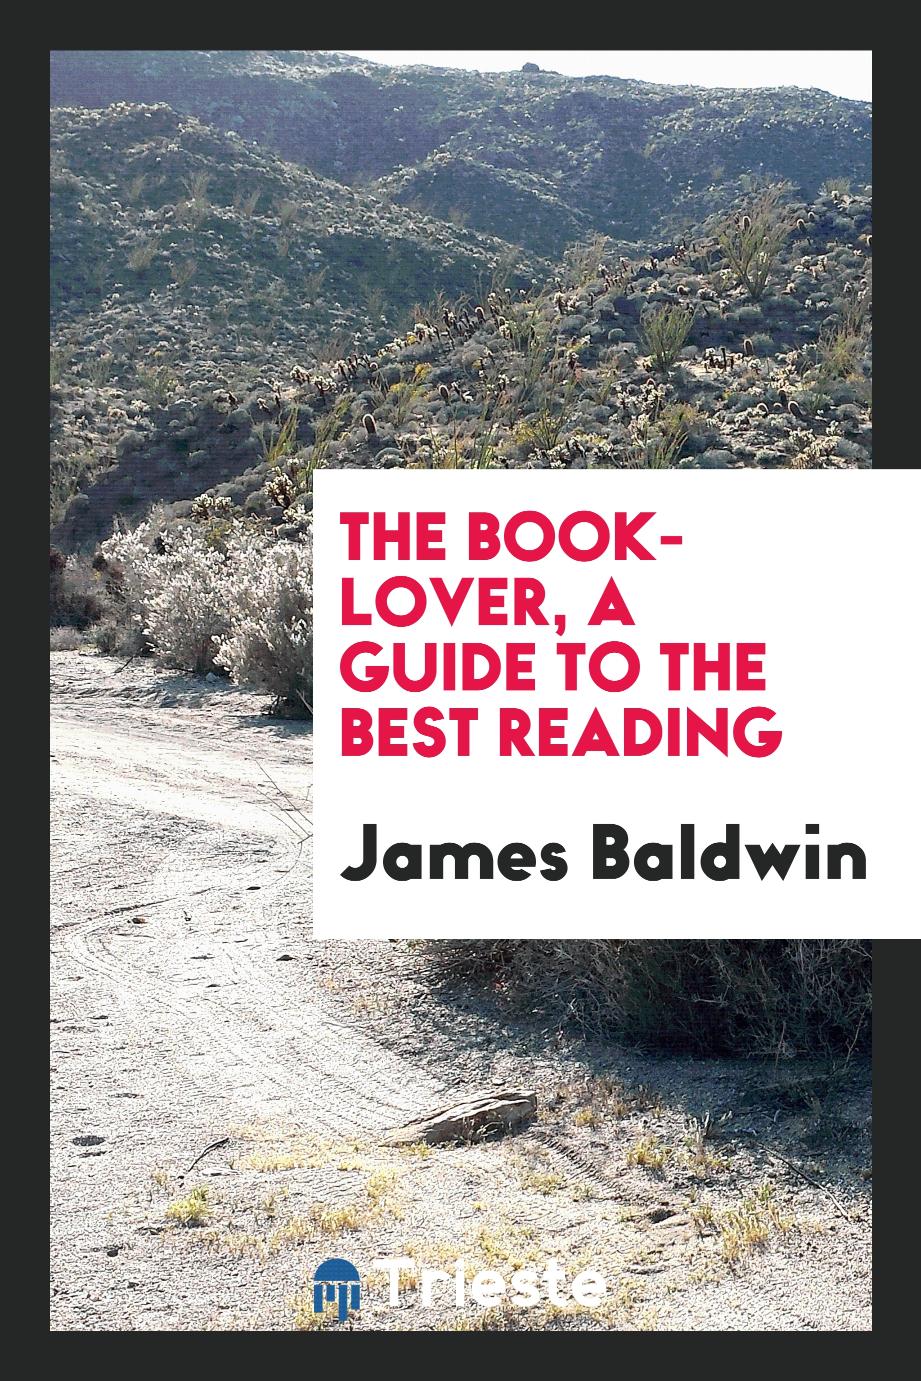 James Baldwin - The book-lover, a guide to the best reading